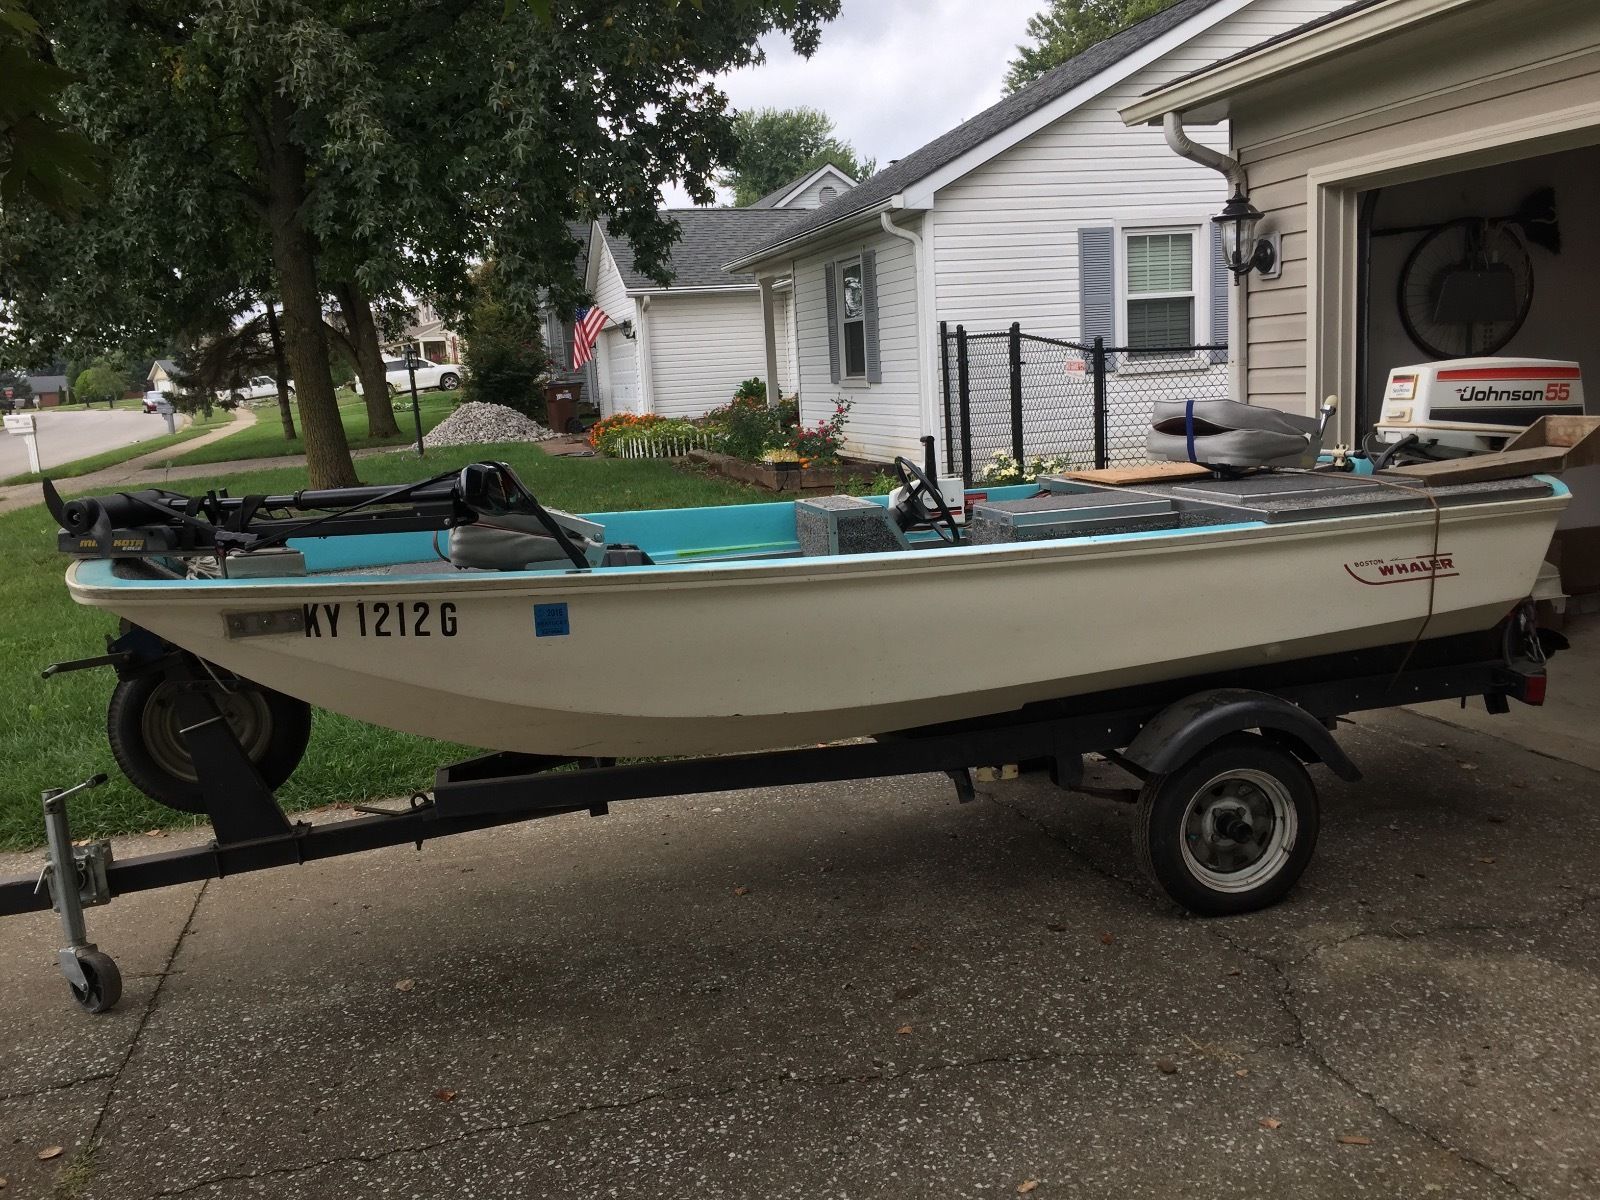 Boston Whaler Sport 13' 1969 for sale for $1,750 - Boats-from-USA.com